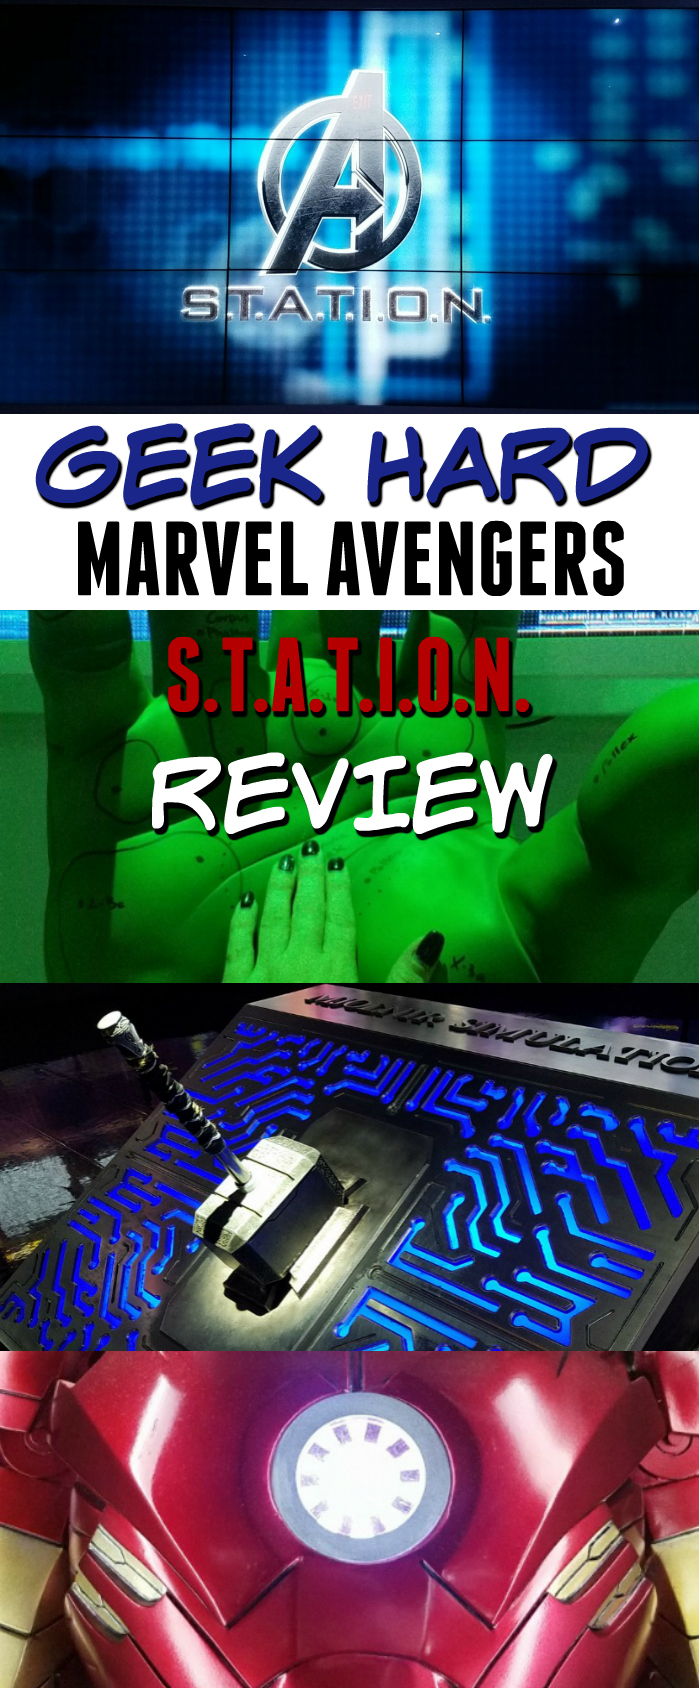 Marvel Avengers Station Review, Things to do in Las Vegas